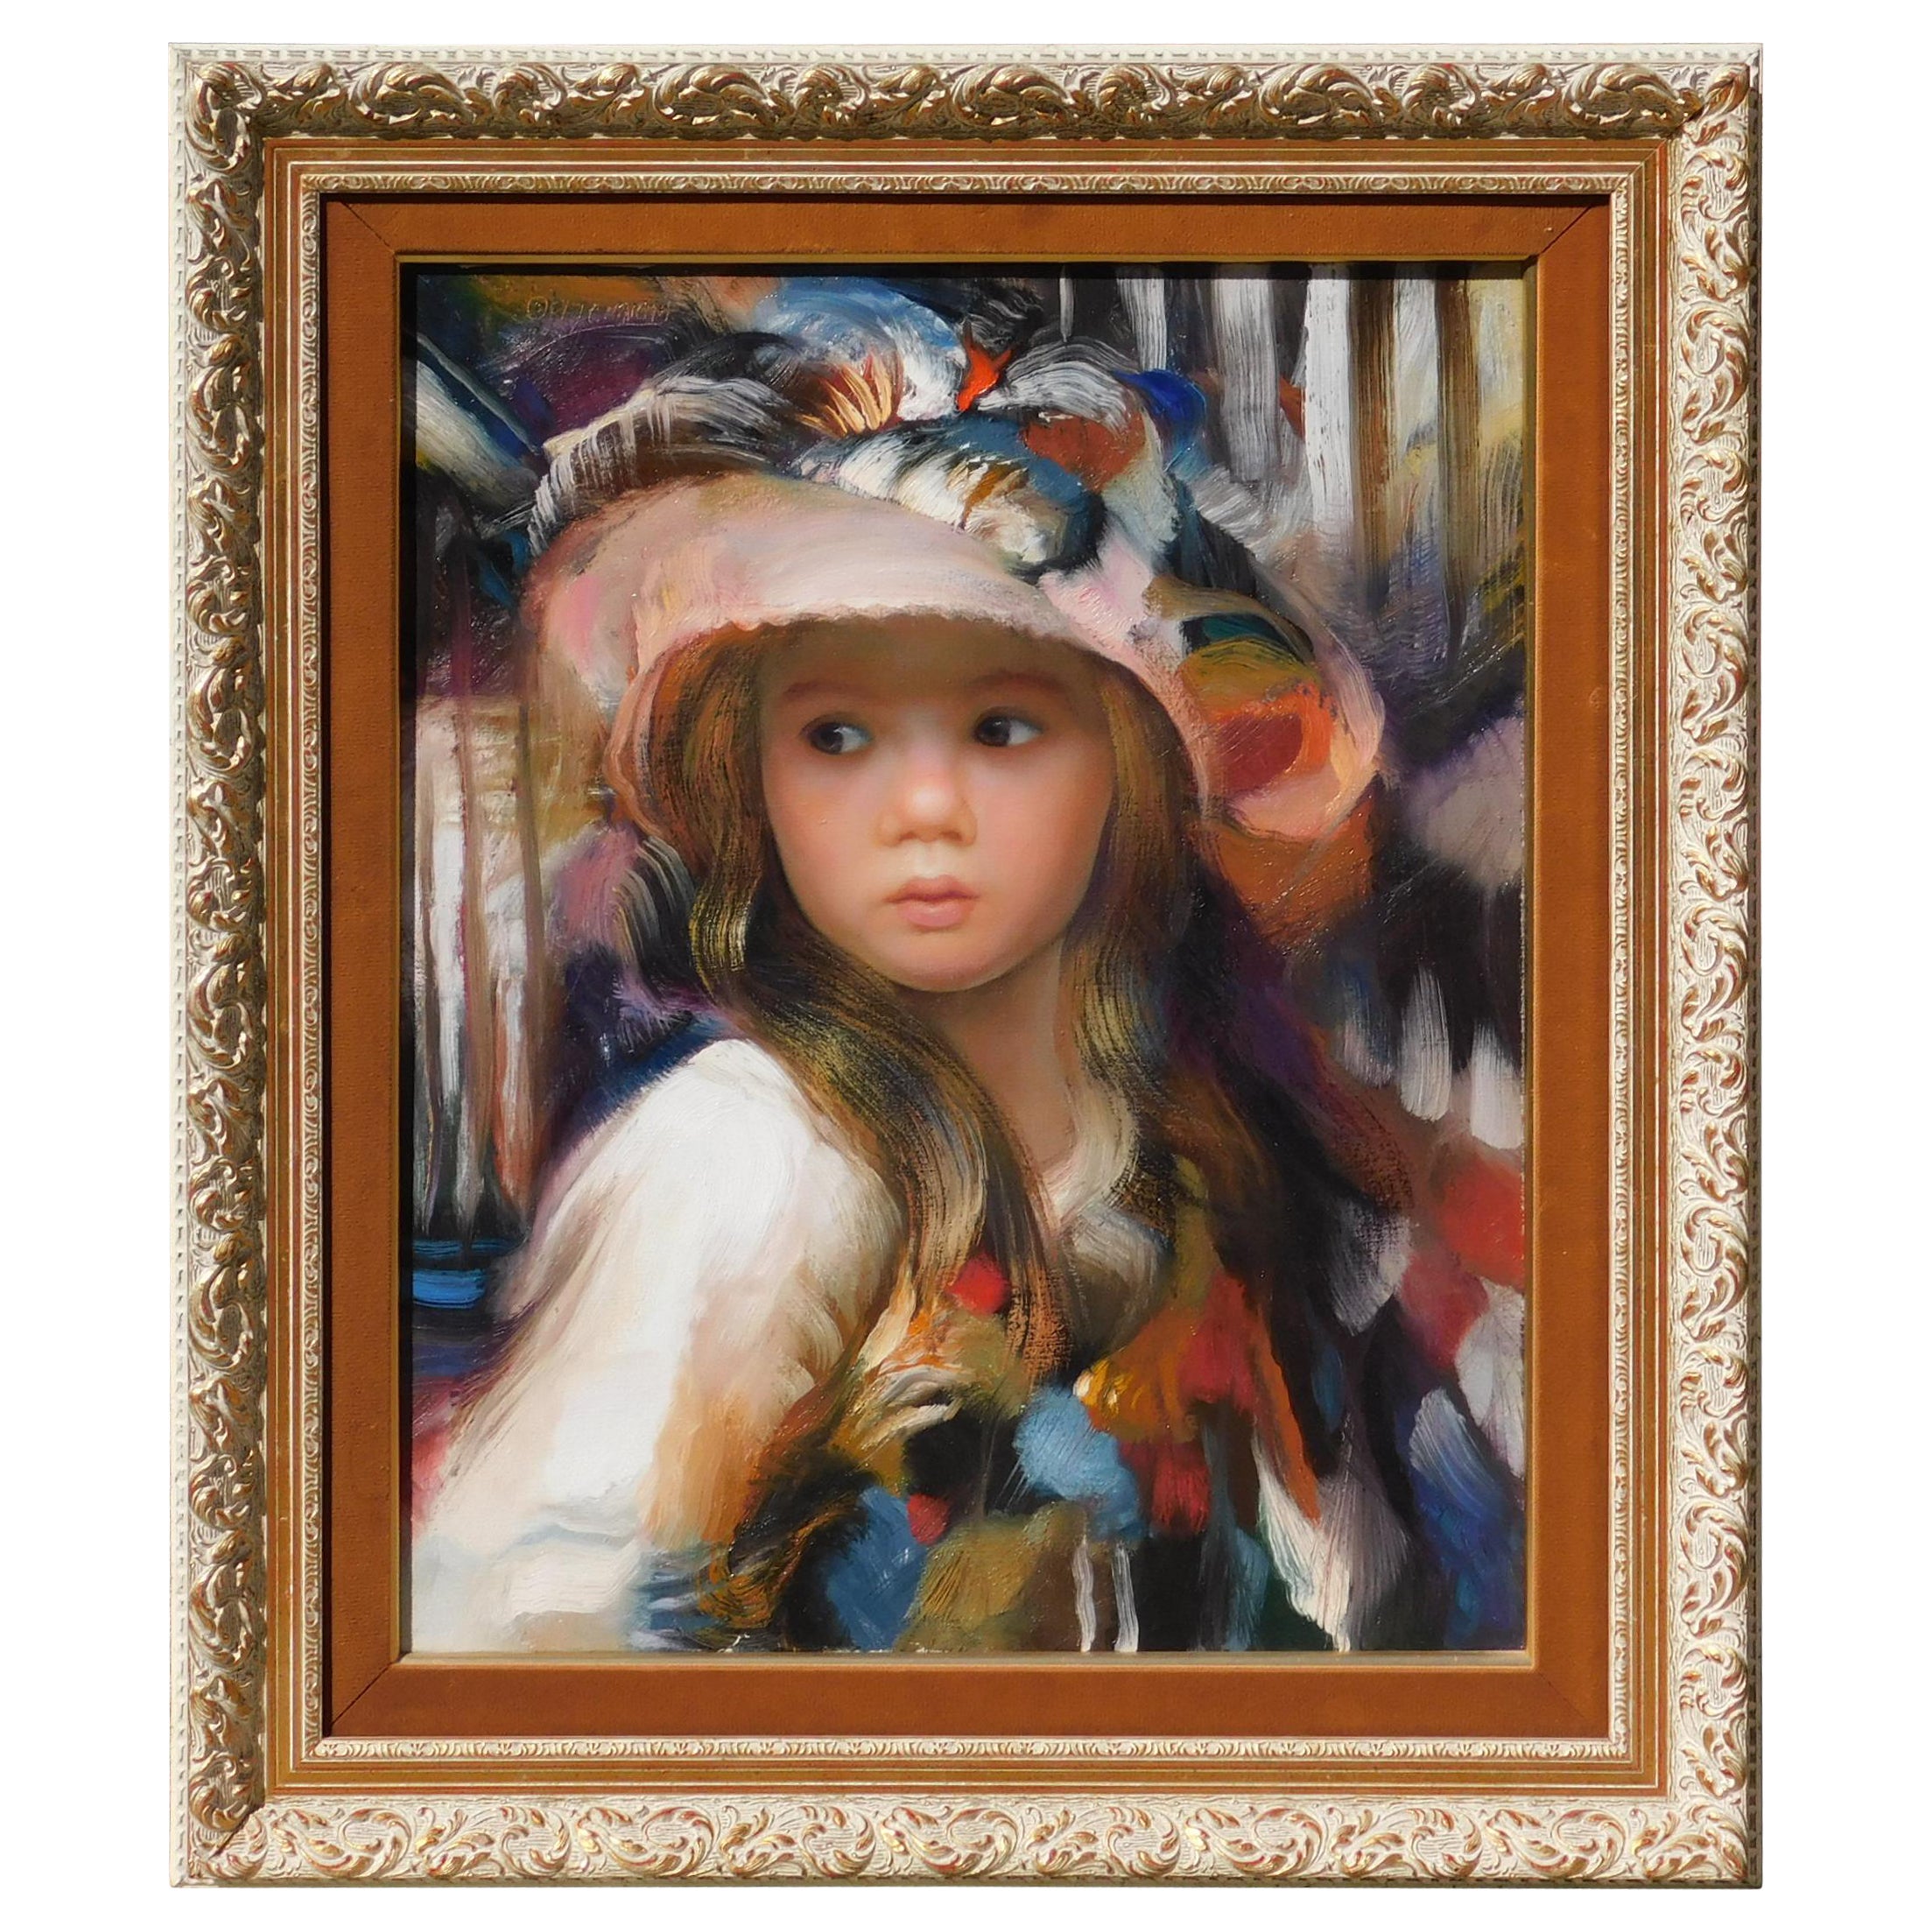 Franceso Masseria Portrait of a Young Girl, Oil on Canvas